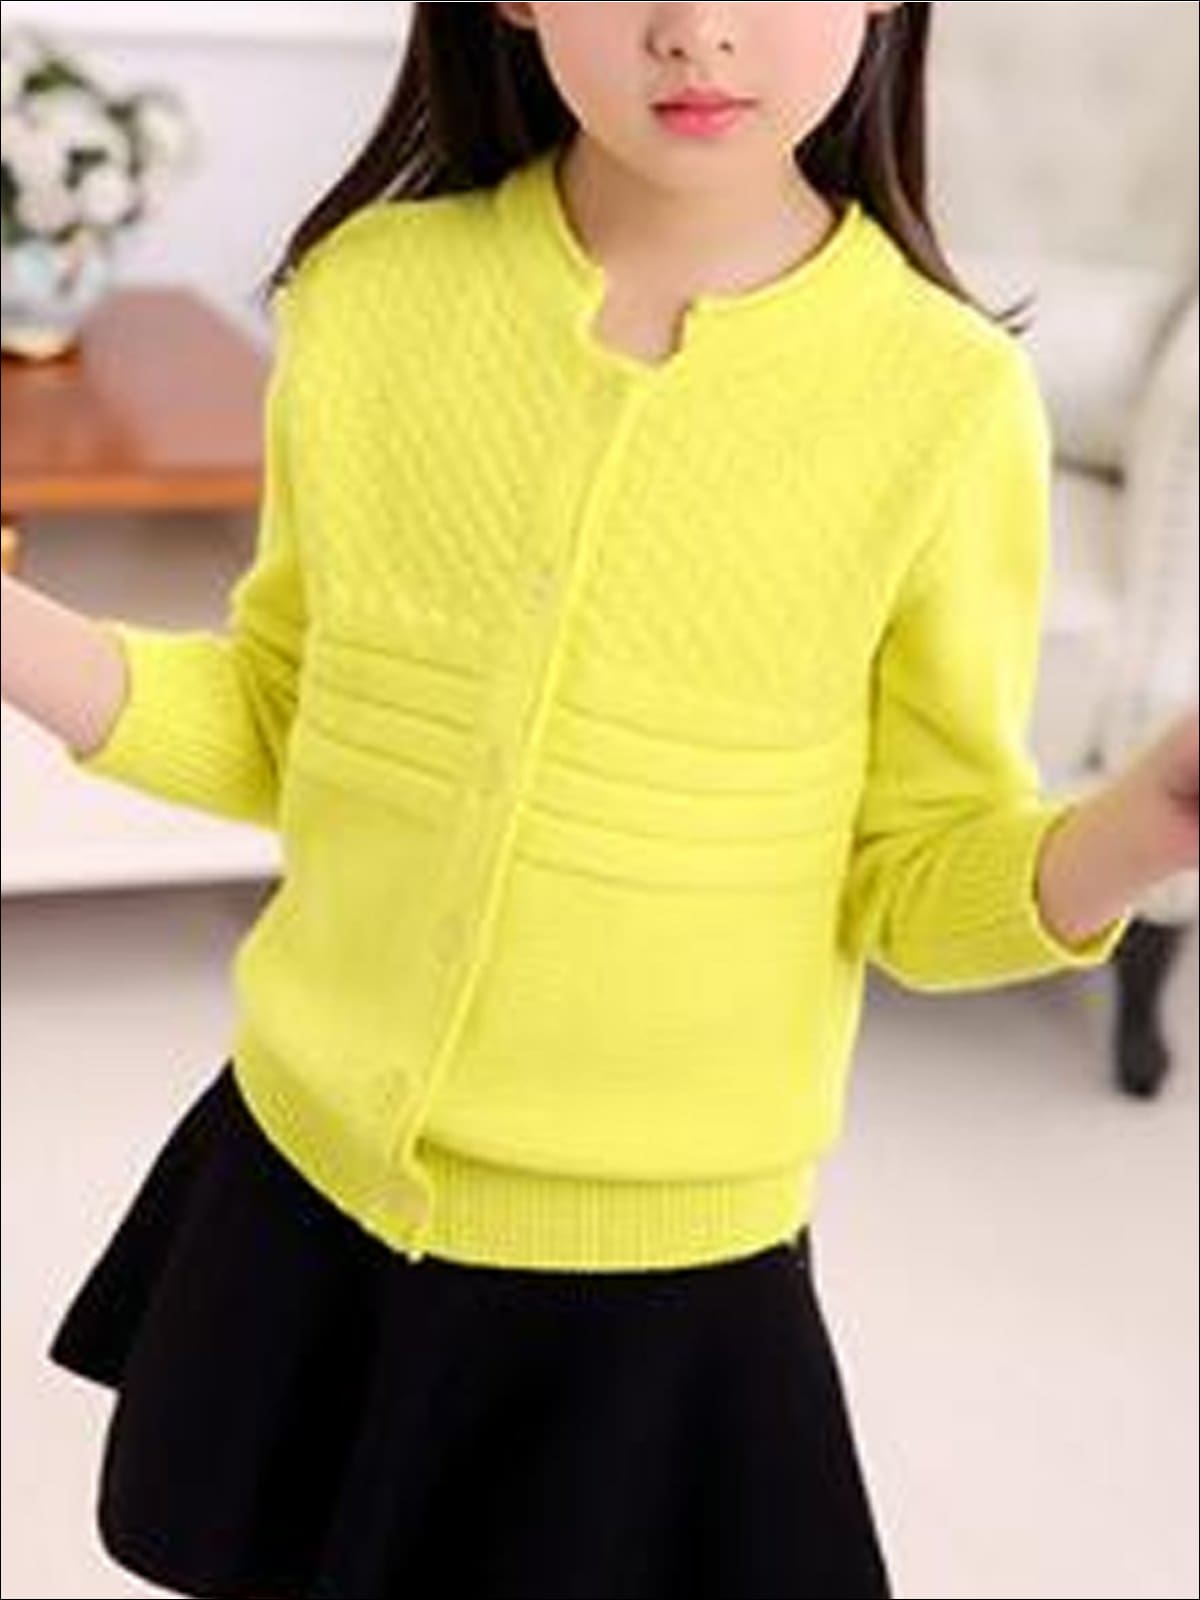 Girls Cozy Knitted Button Up Cardigan - Yellow / 4T - Girls Sweater